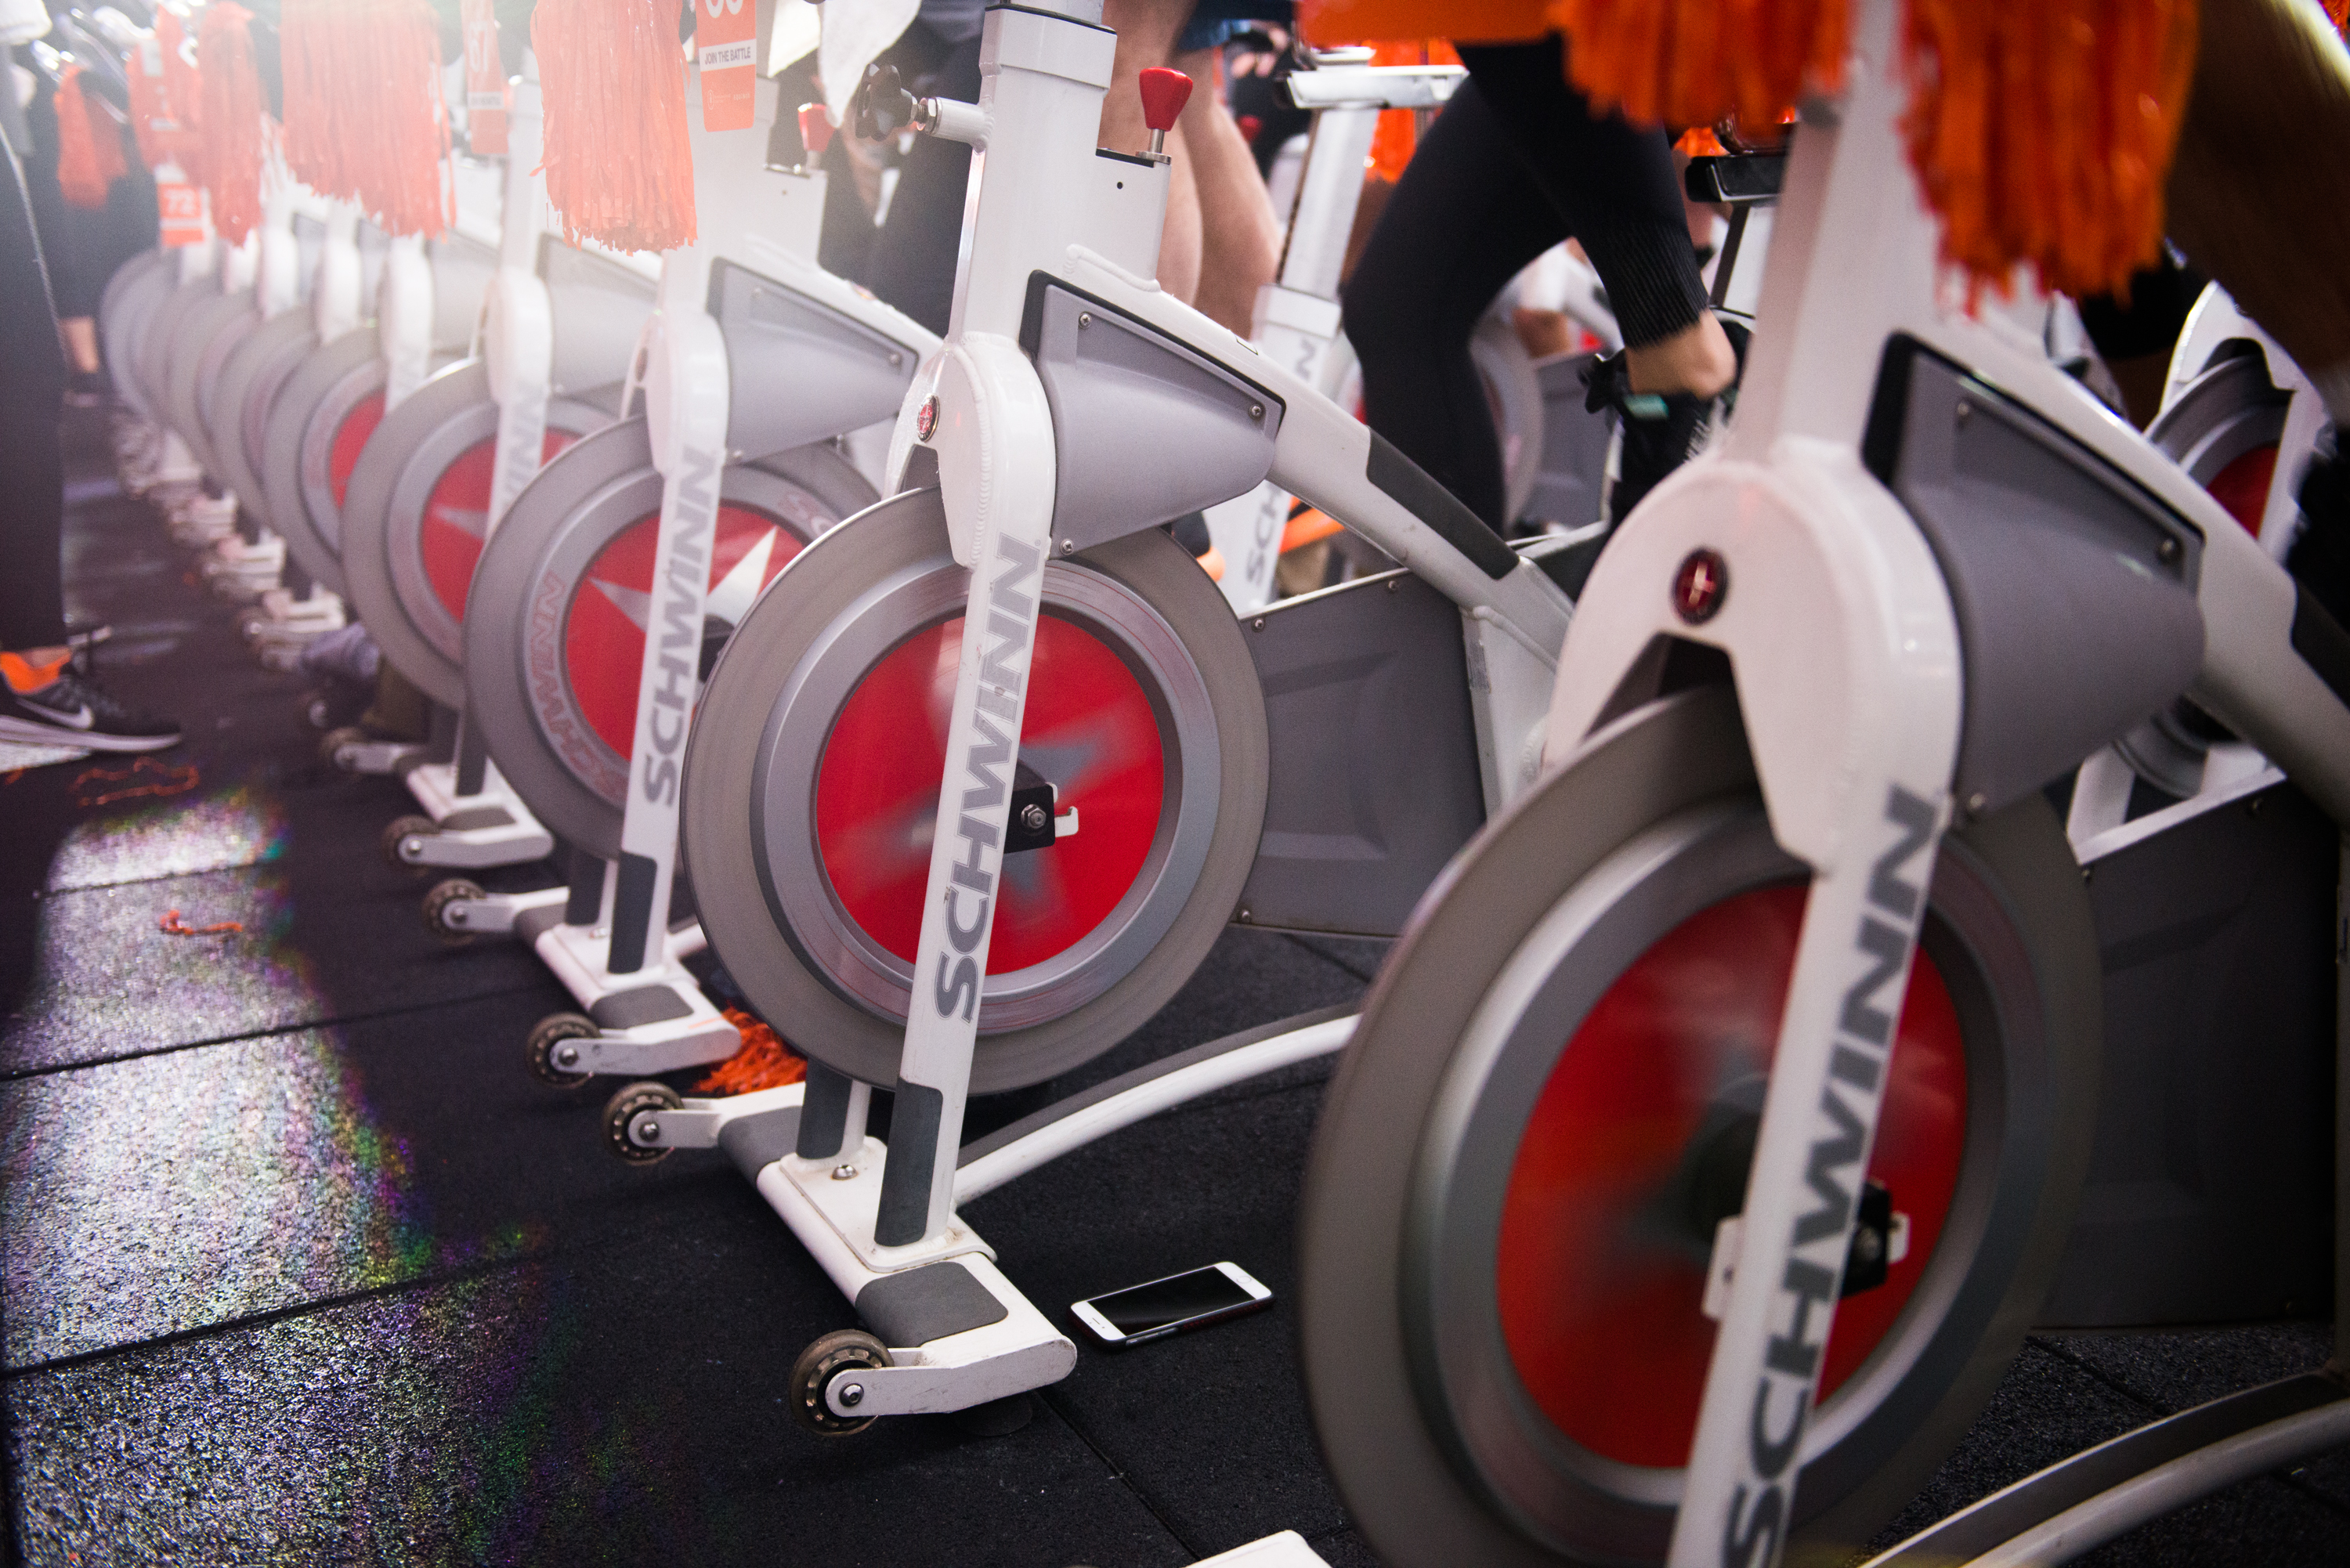 Spin class can lead to rhabdomyolysis in some people